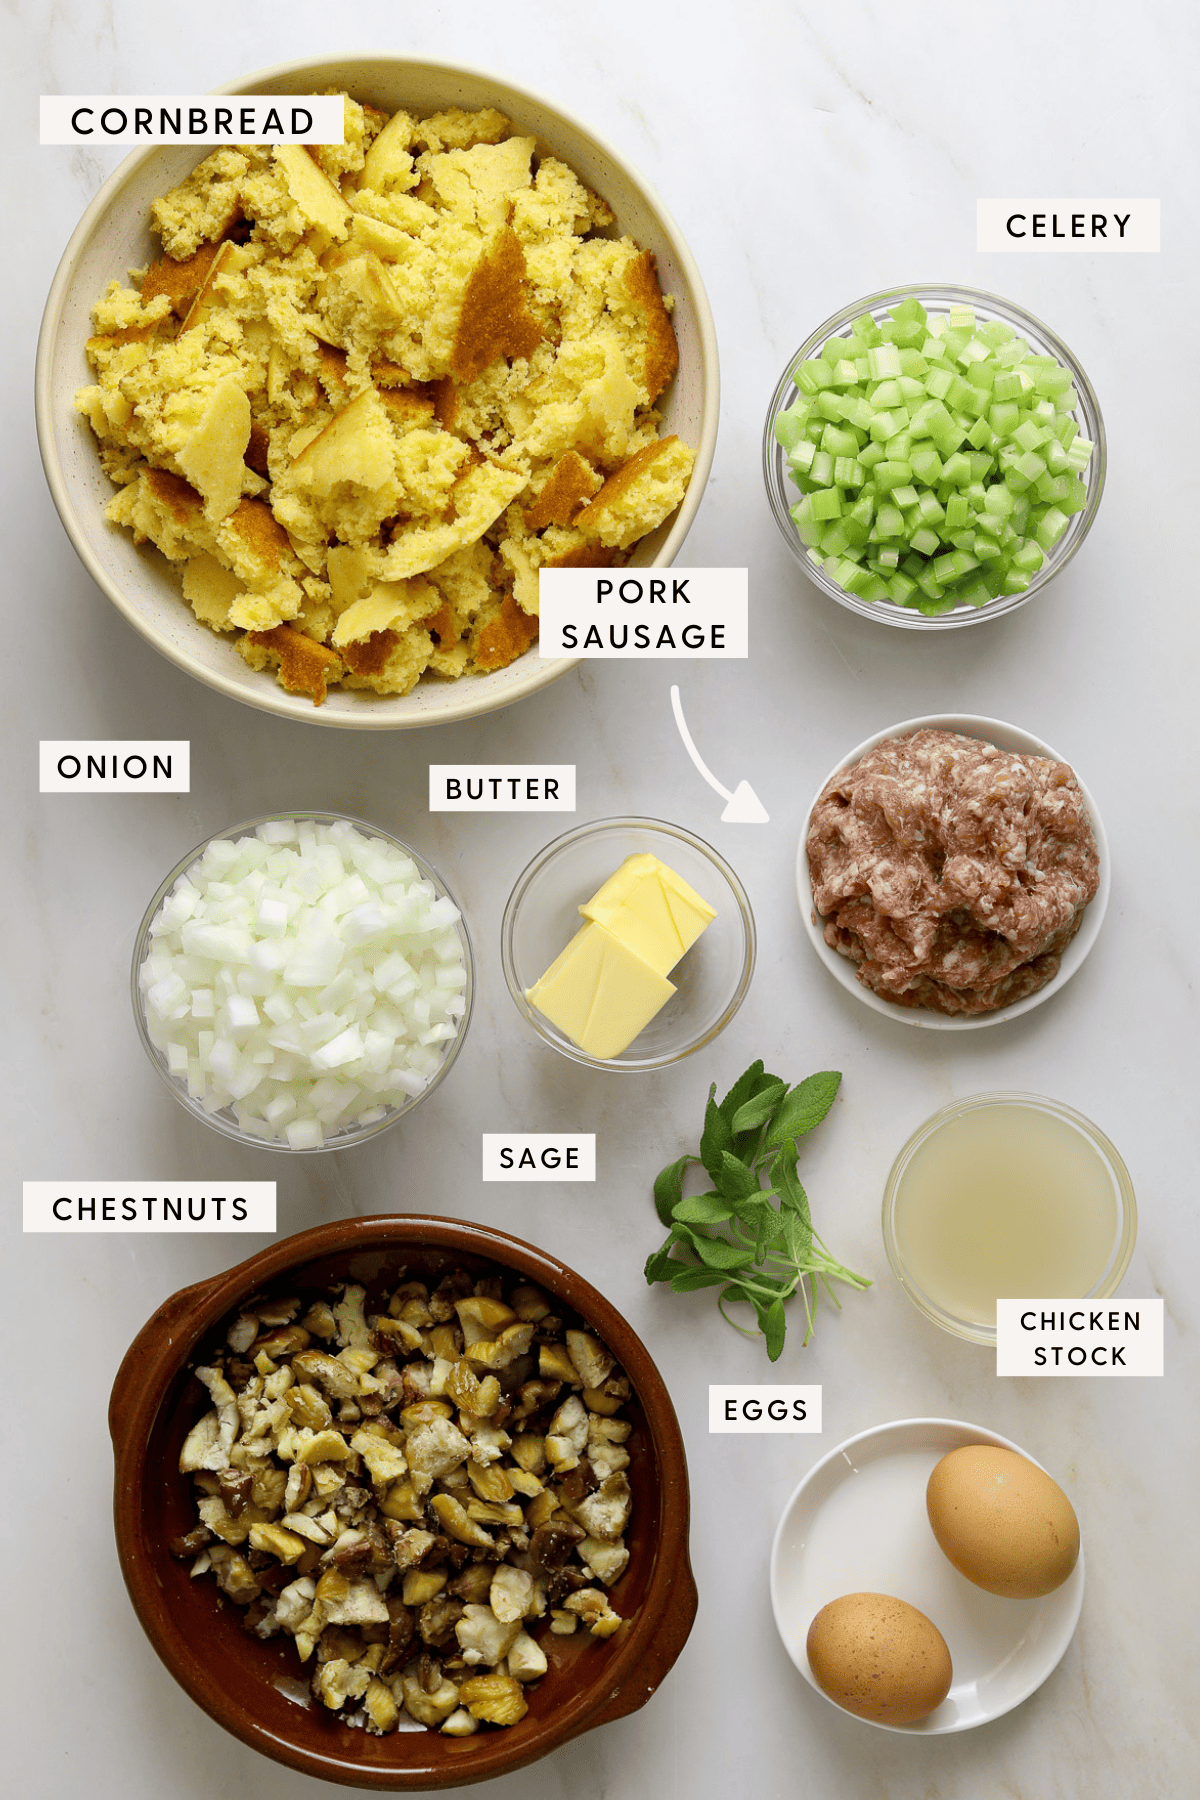 Stuffing ingredients in individual bowls; chopped chestnuts, eggs, chicken stock, diced celery and onion etc.